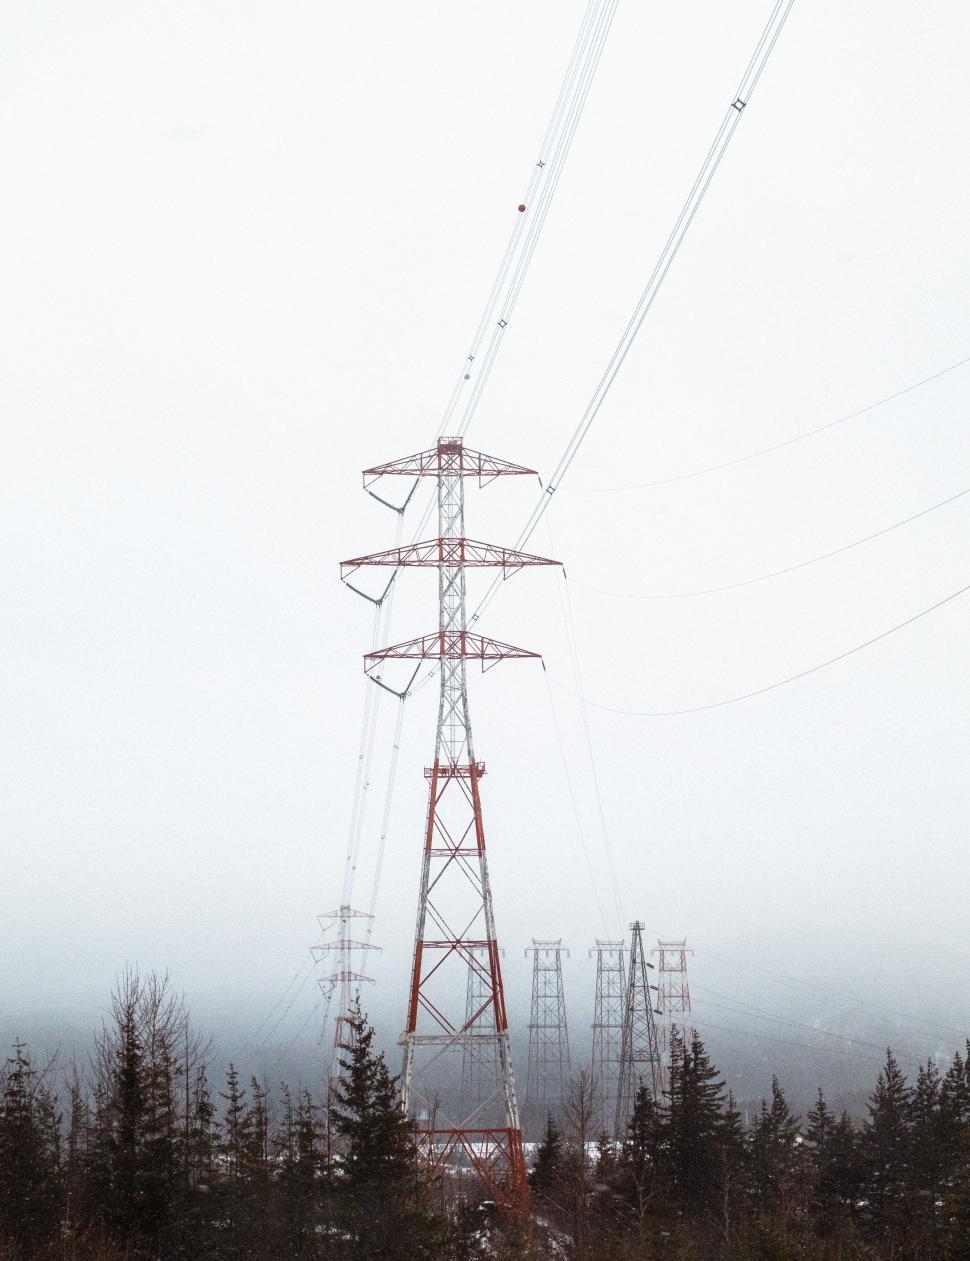 Free Image of Power Line Cutting Through Forest 